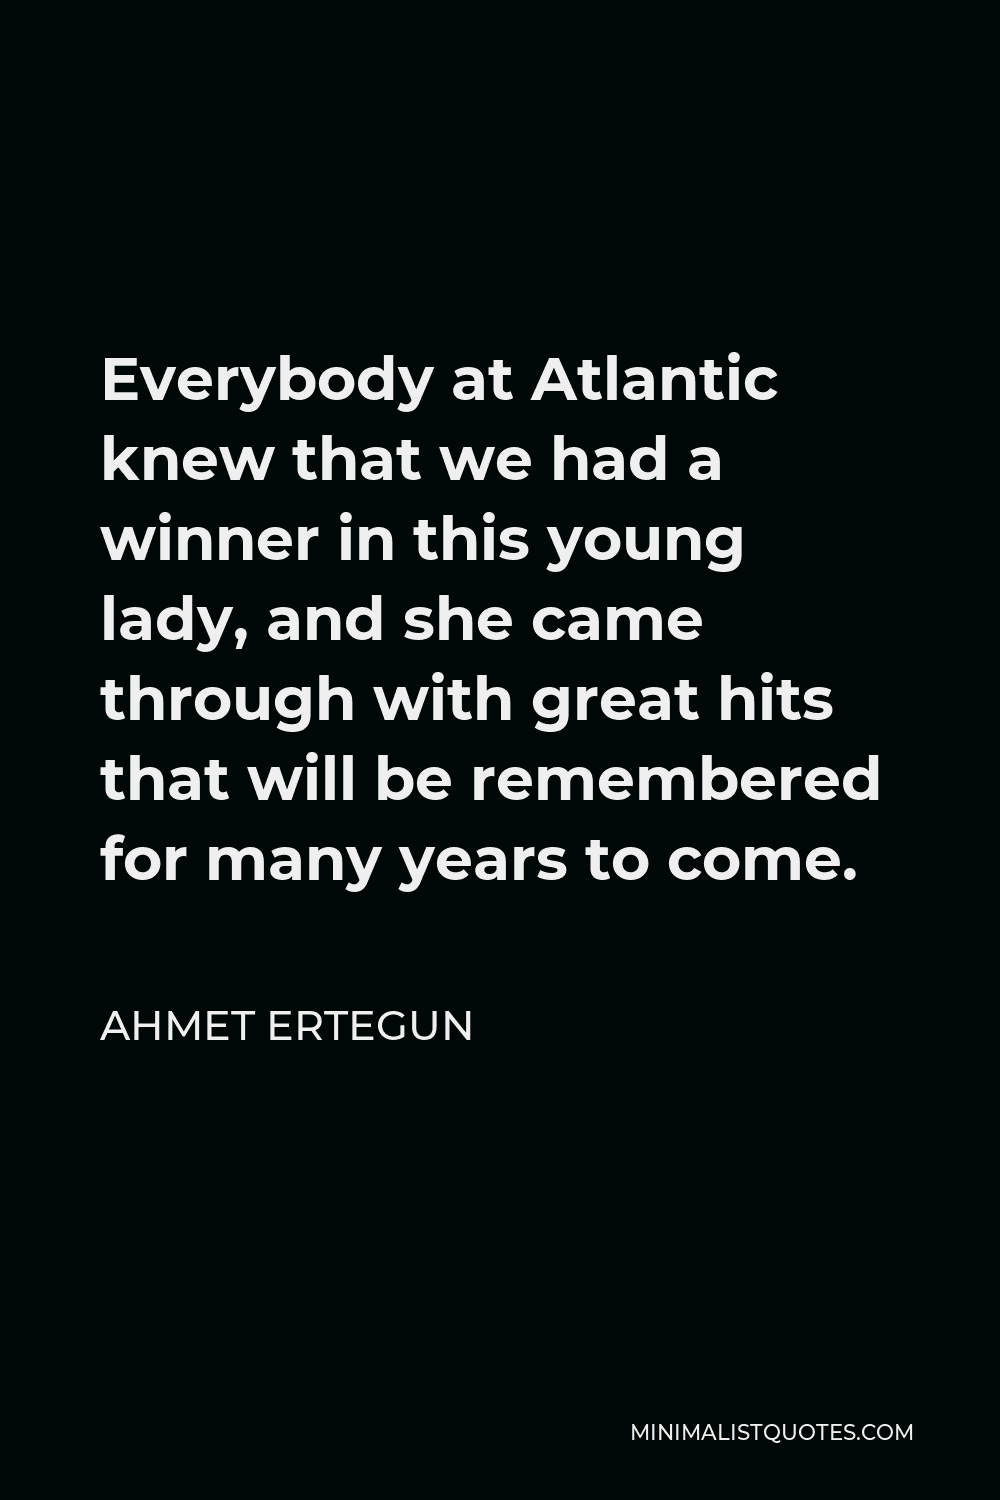 Ahmet Ertegun Quote - Everybody at Atlantic knew that we had a winner in this young lady, and she came through with great hits that will be remembered for many years to come.